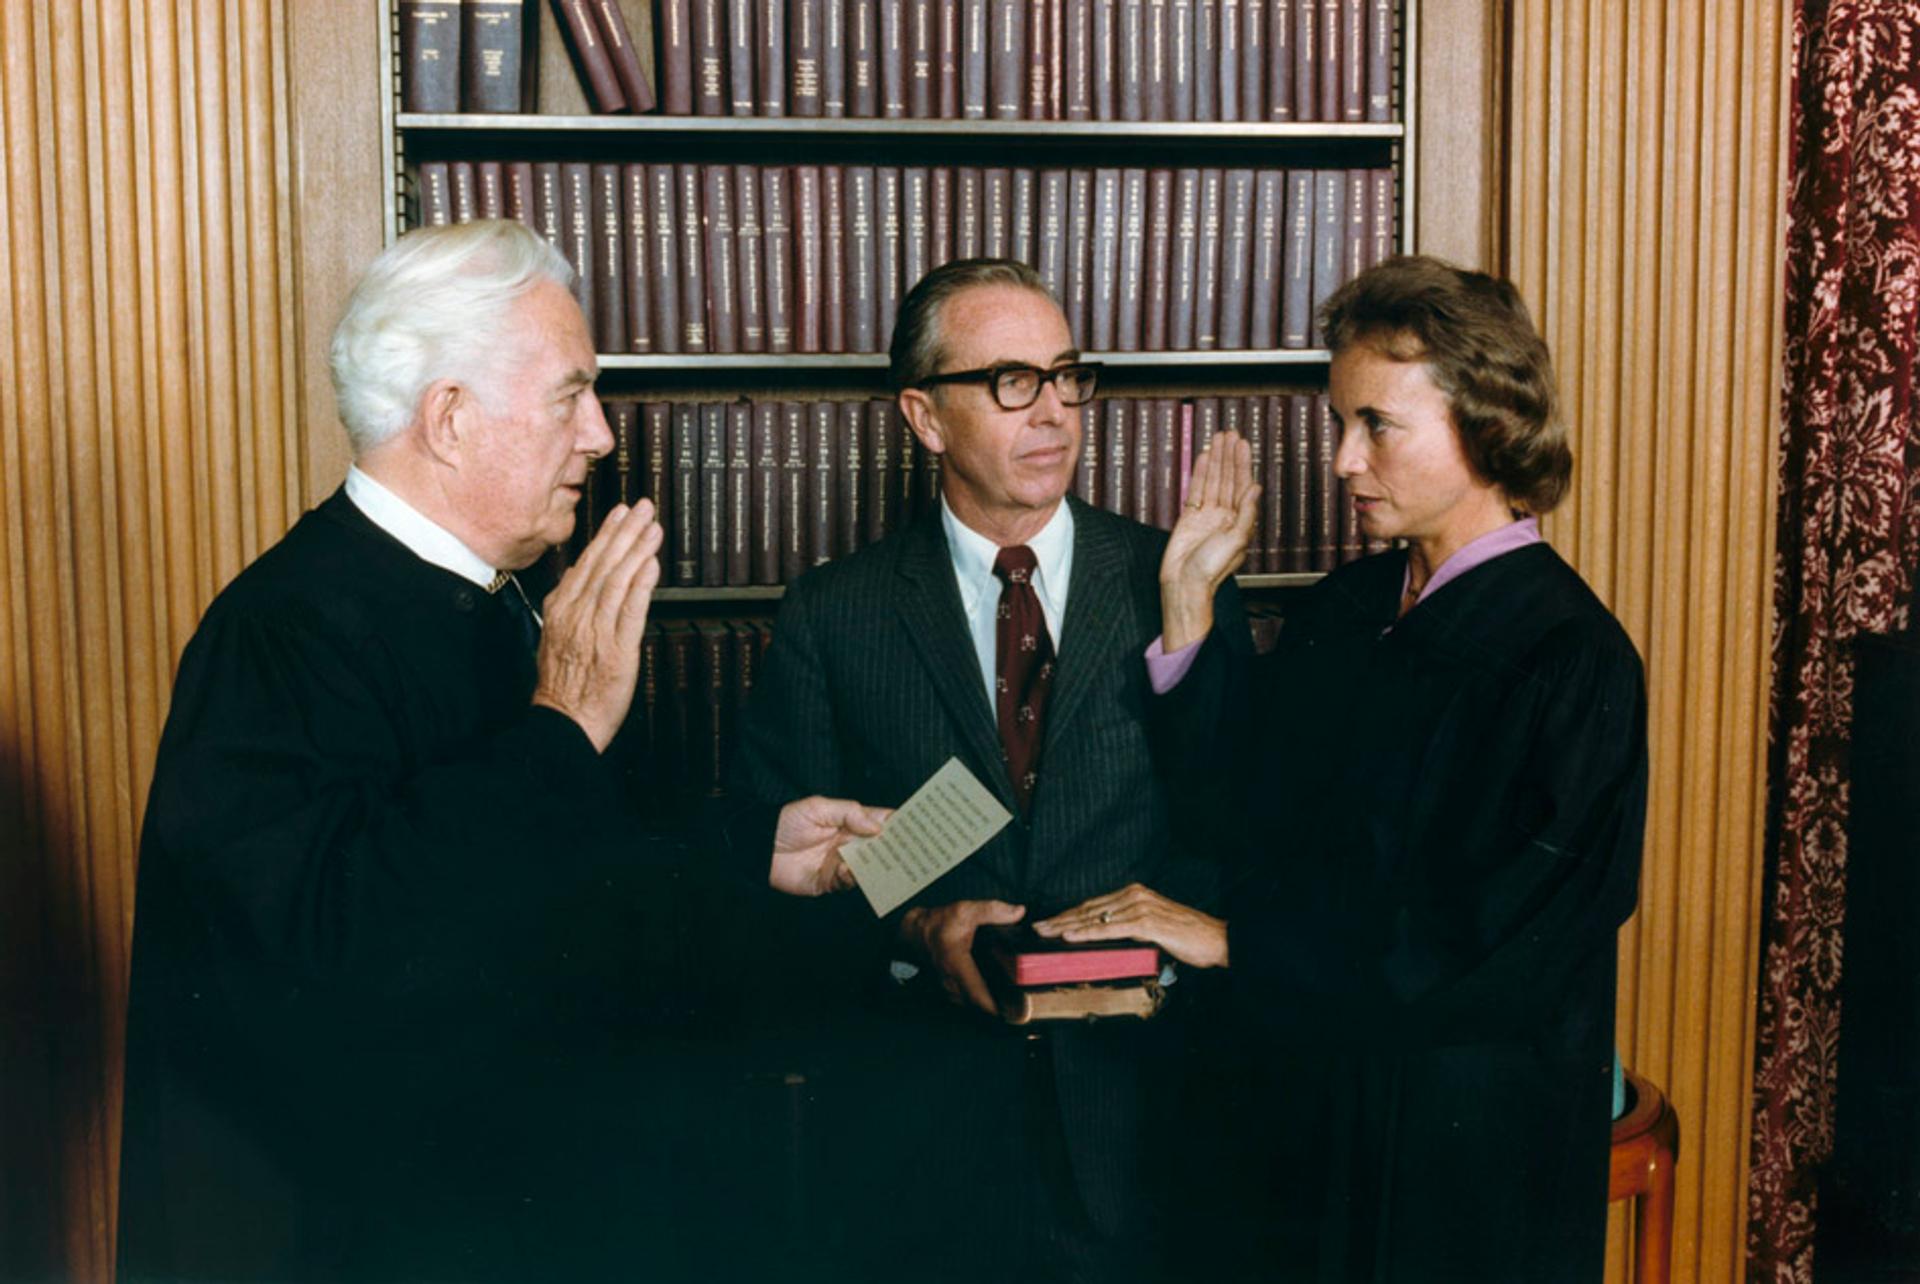 Sandra Day O'Connor is sworn in as a Supreme Court Justice by Chief Justice Warren Burger